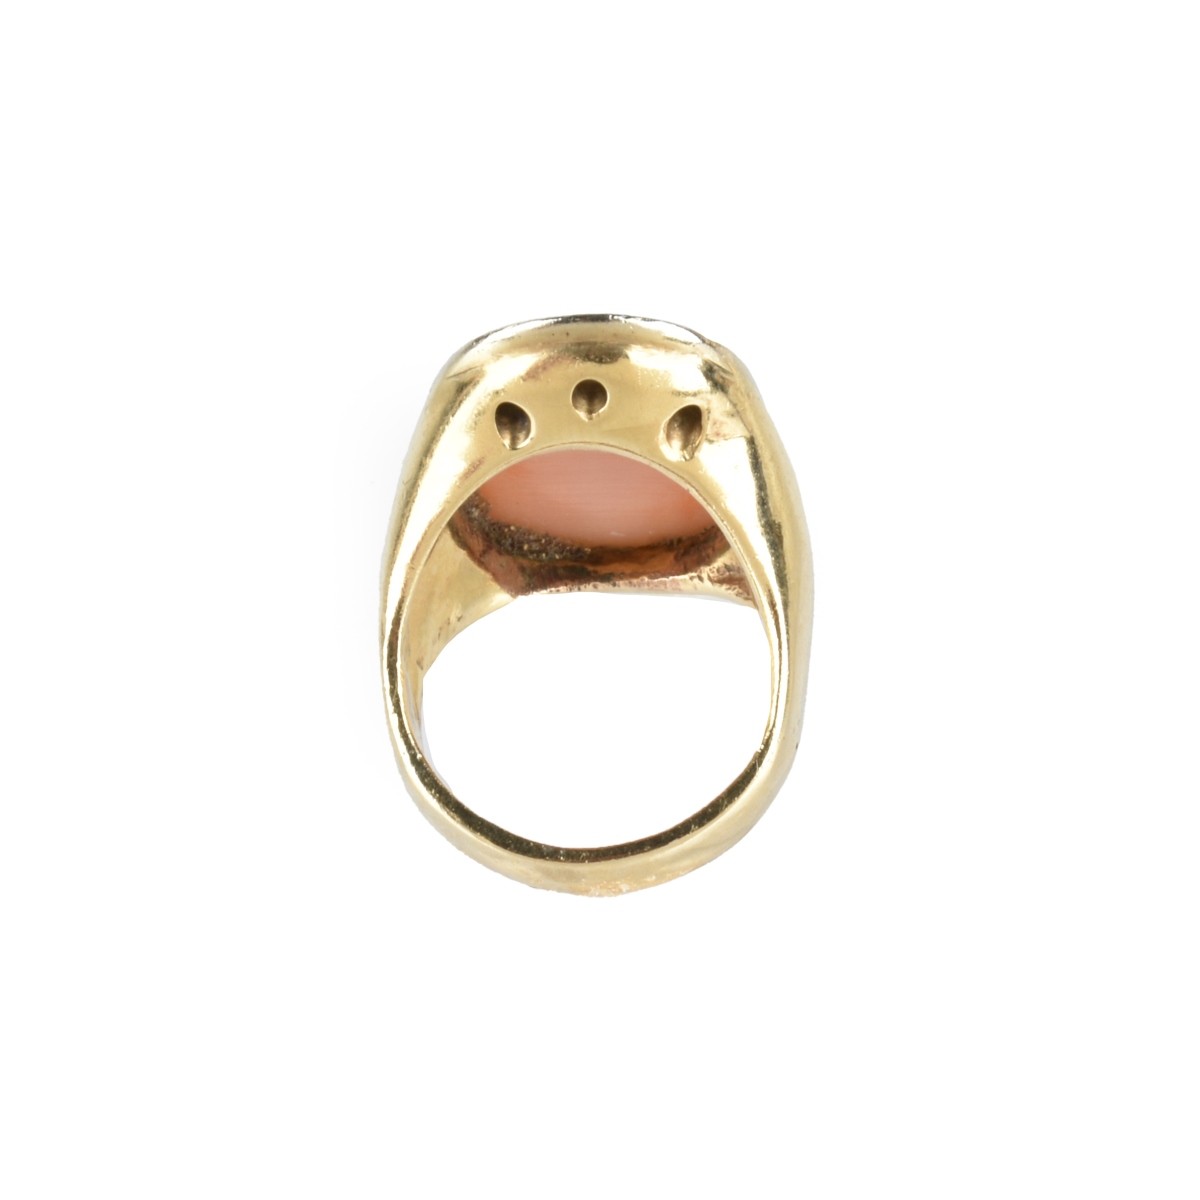 Diamond, Coral and 14K Ring